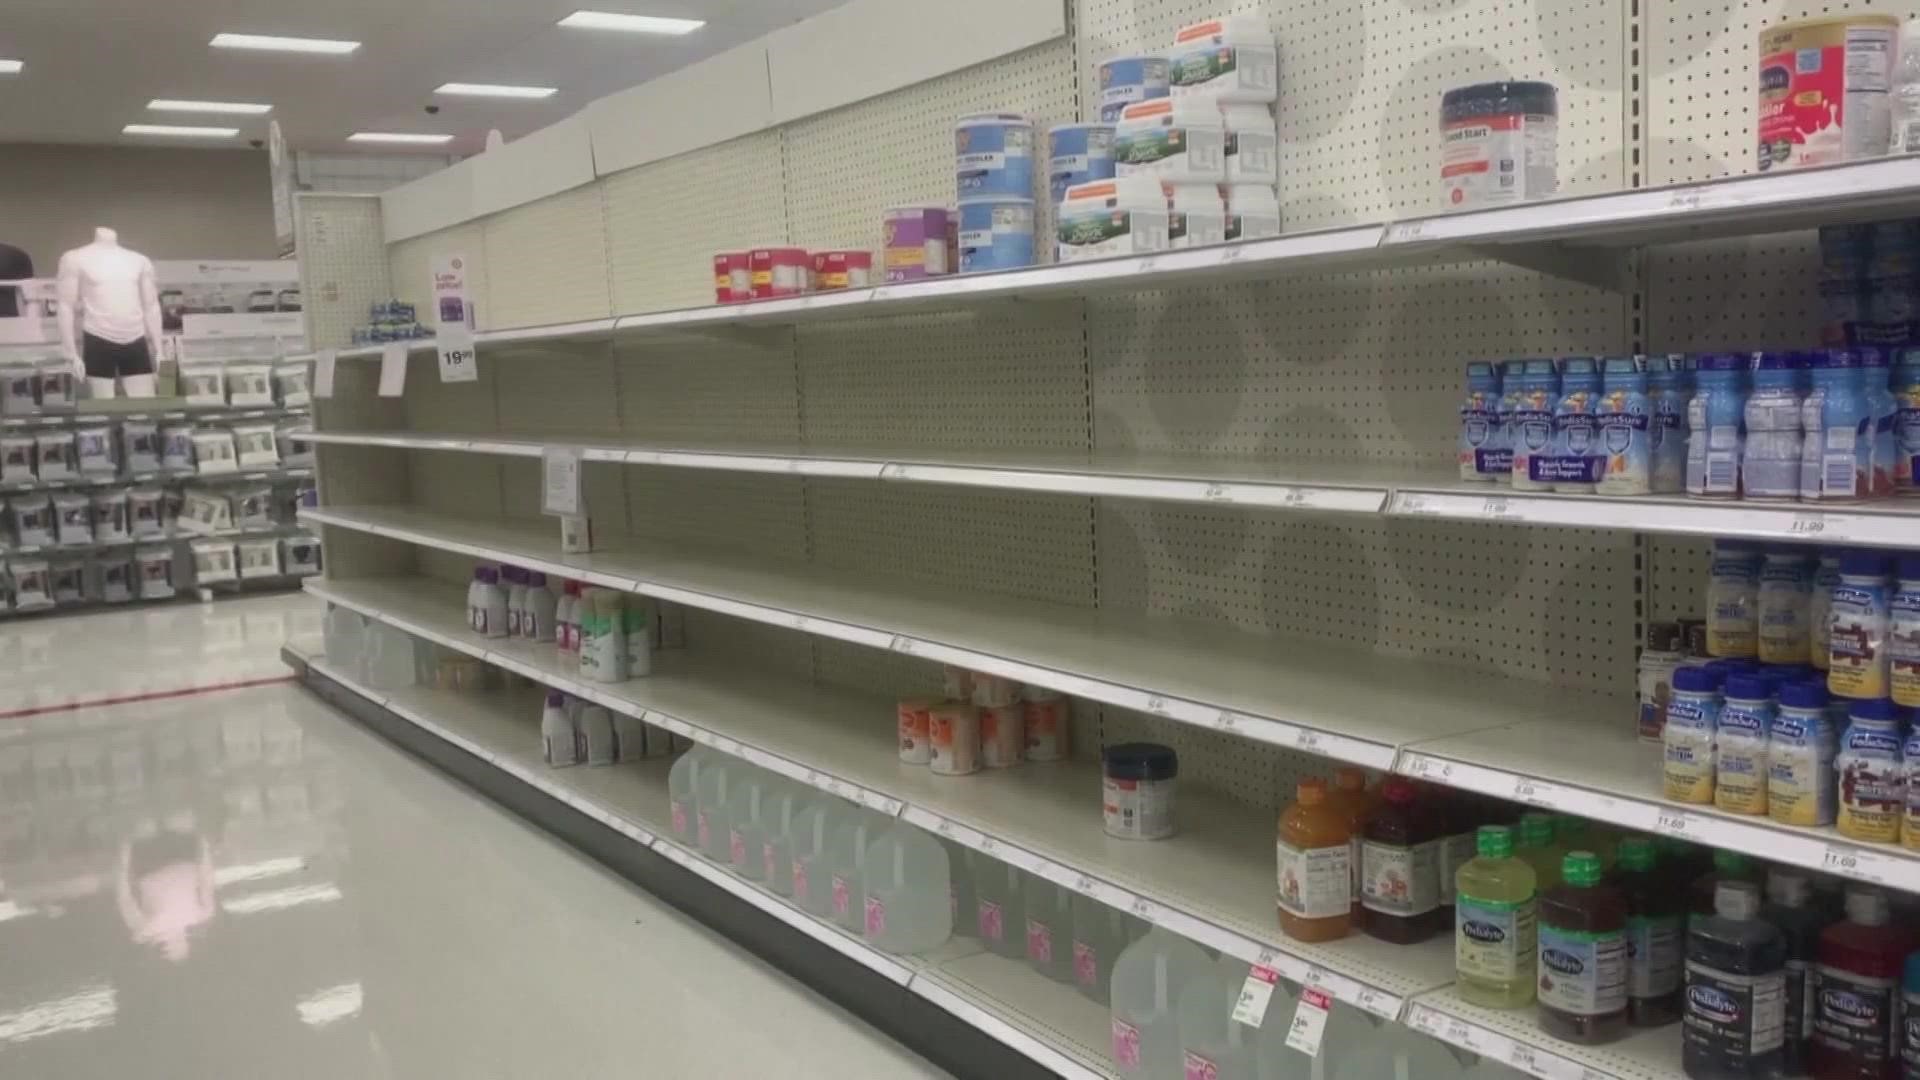 Parents said it takes them hours to find a store with the baby formula their child needs.